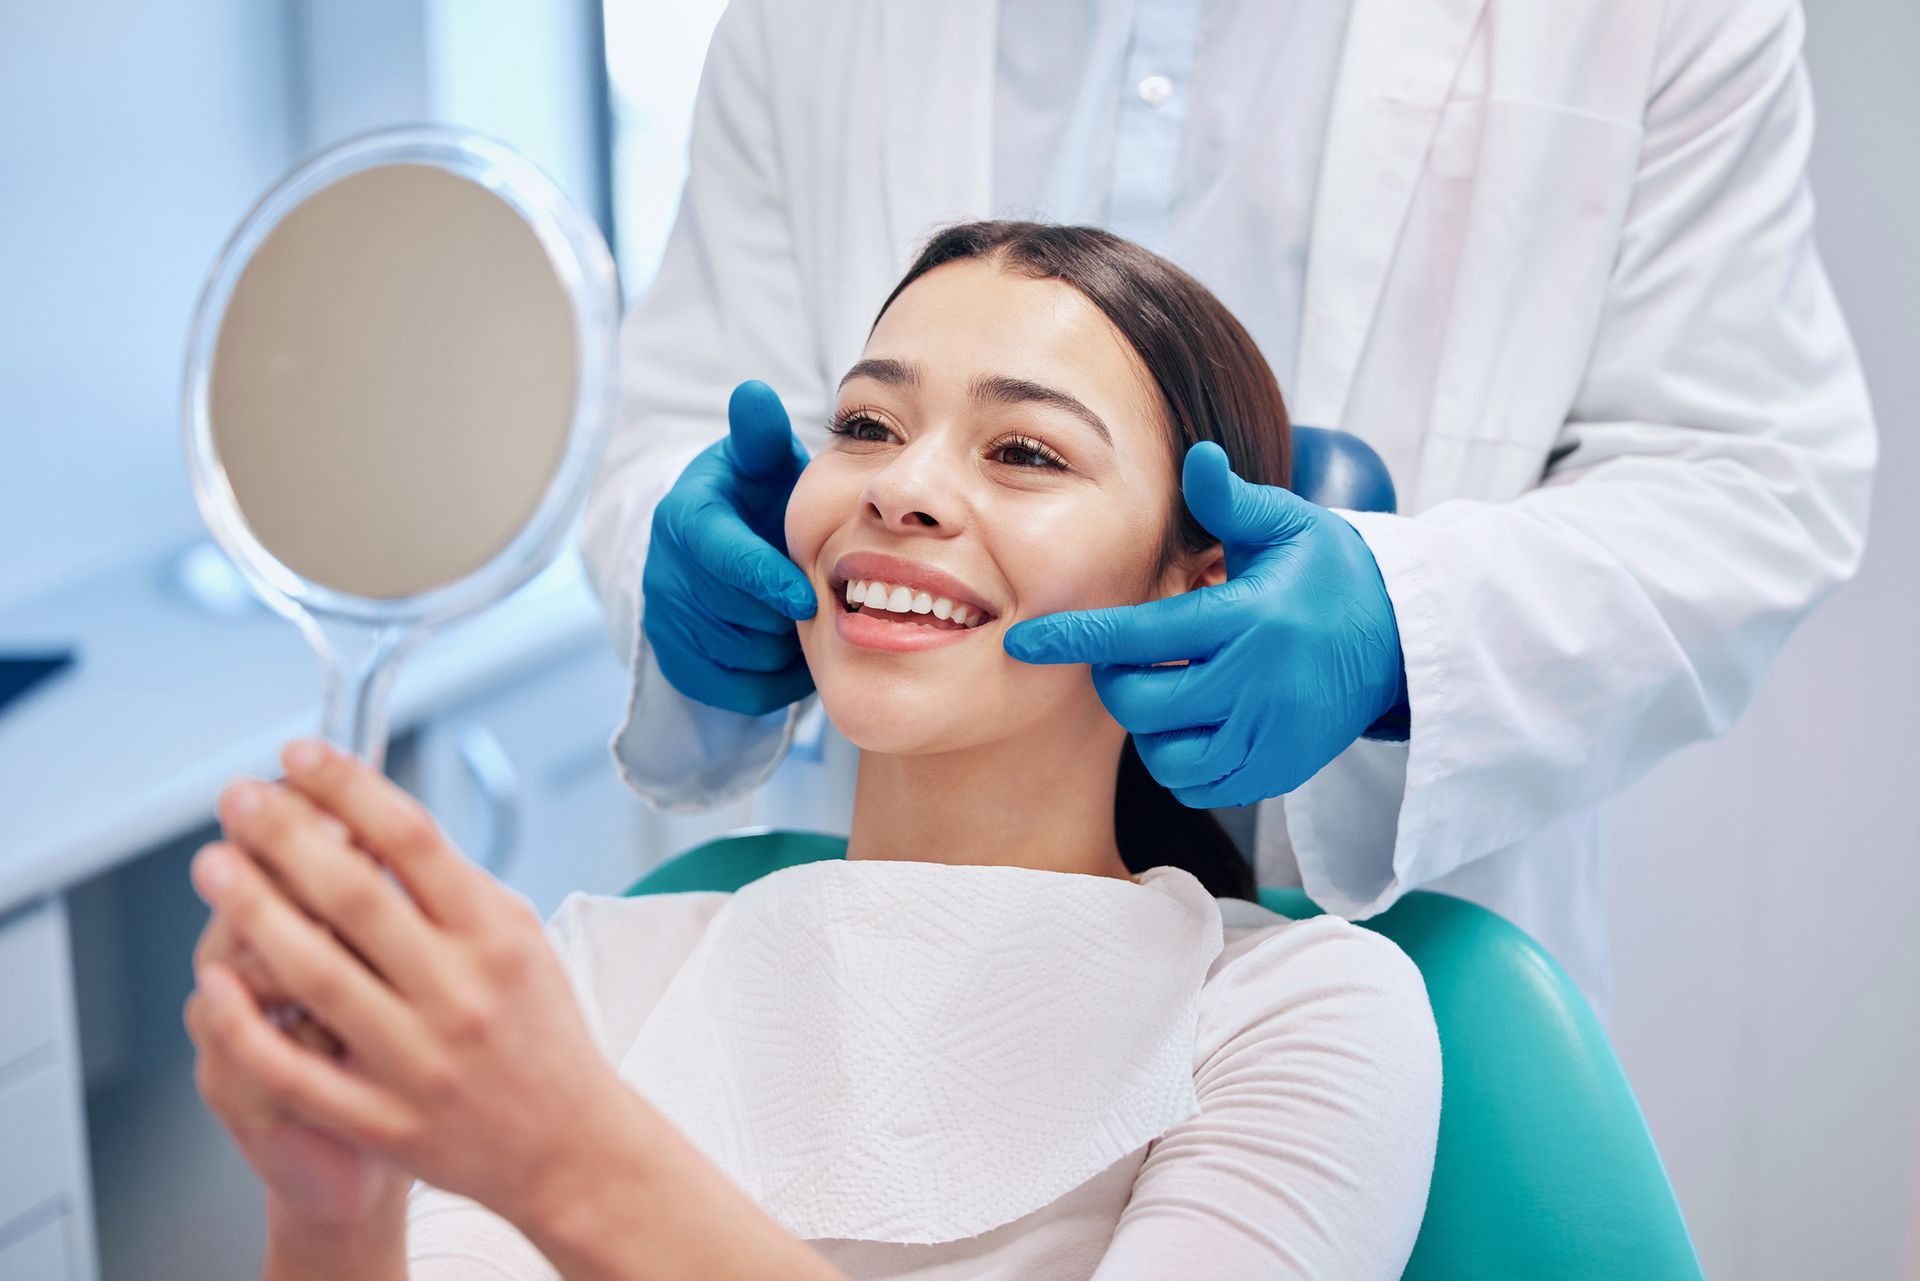 a woman in a dental chair looking at her smile in a mirror